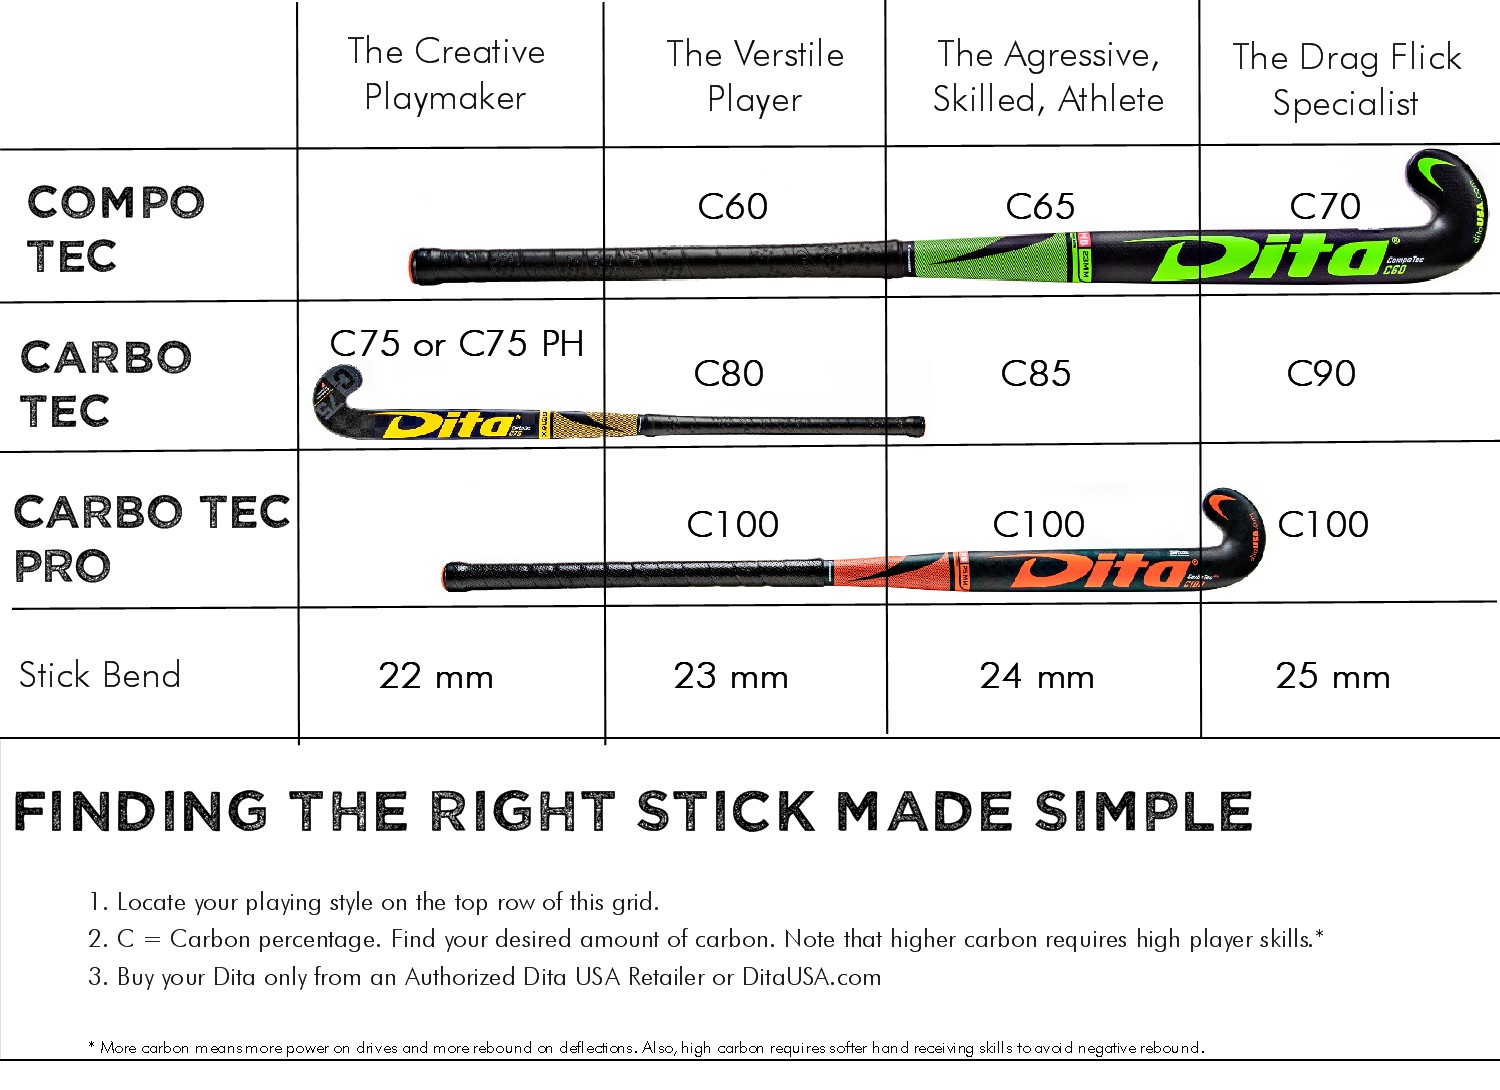 Original Hockey: Field Hockey Sticks - Find the Right Stick for Your Level and Style